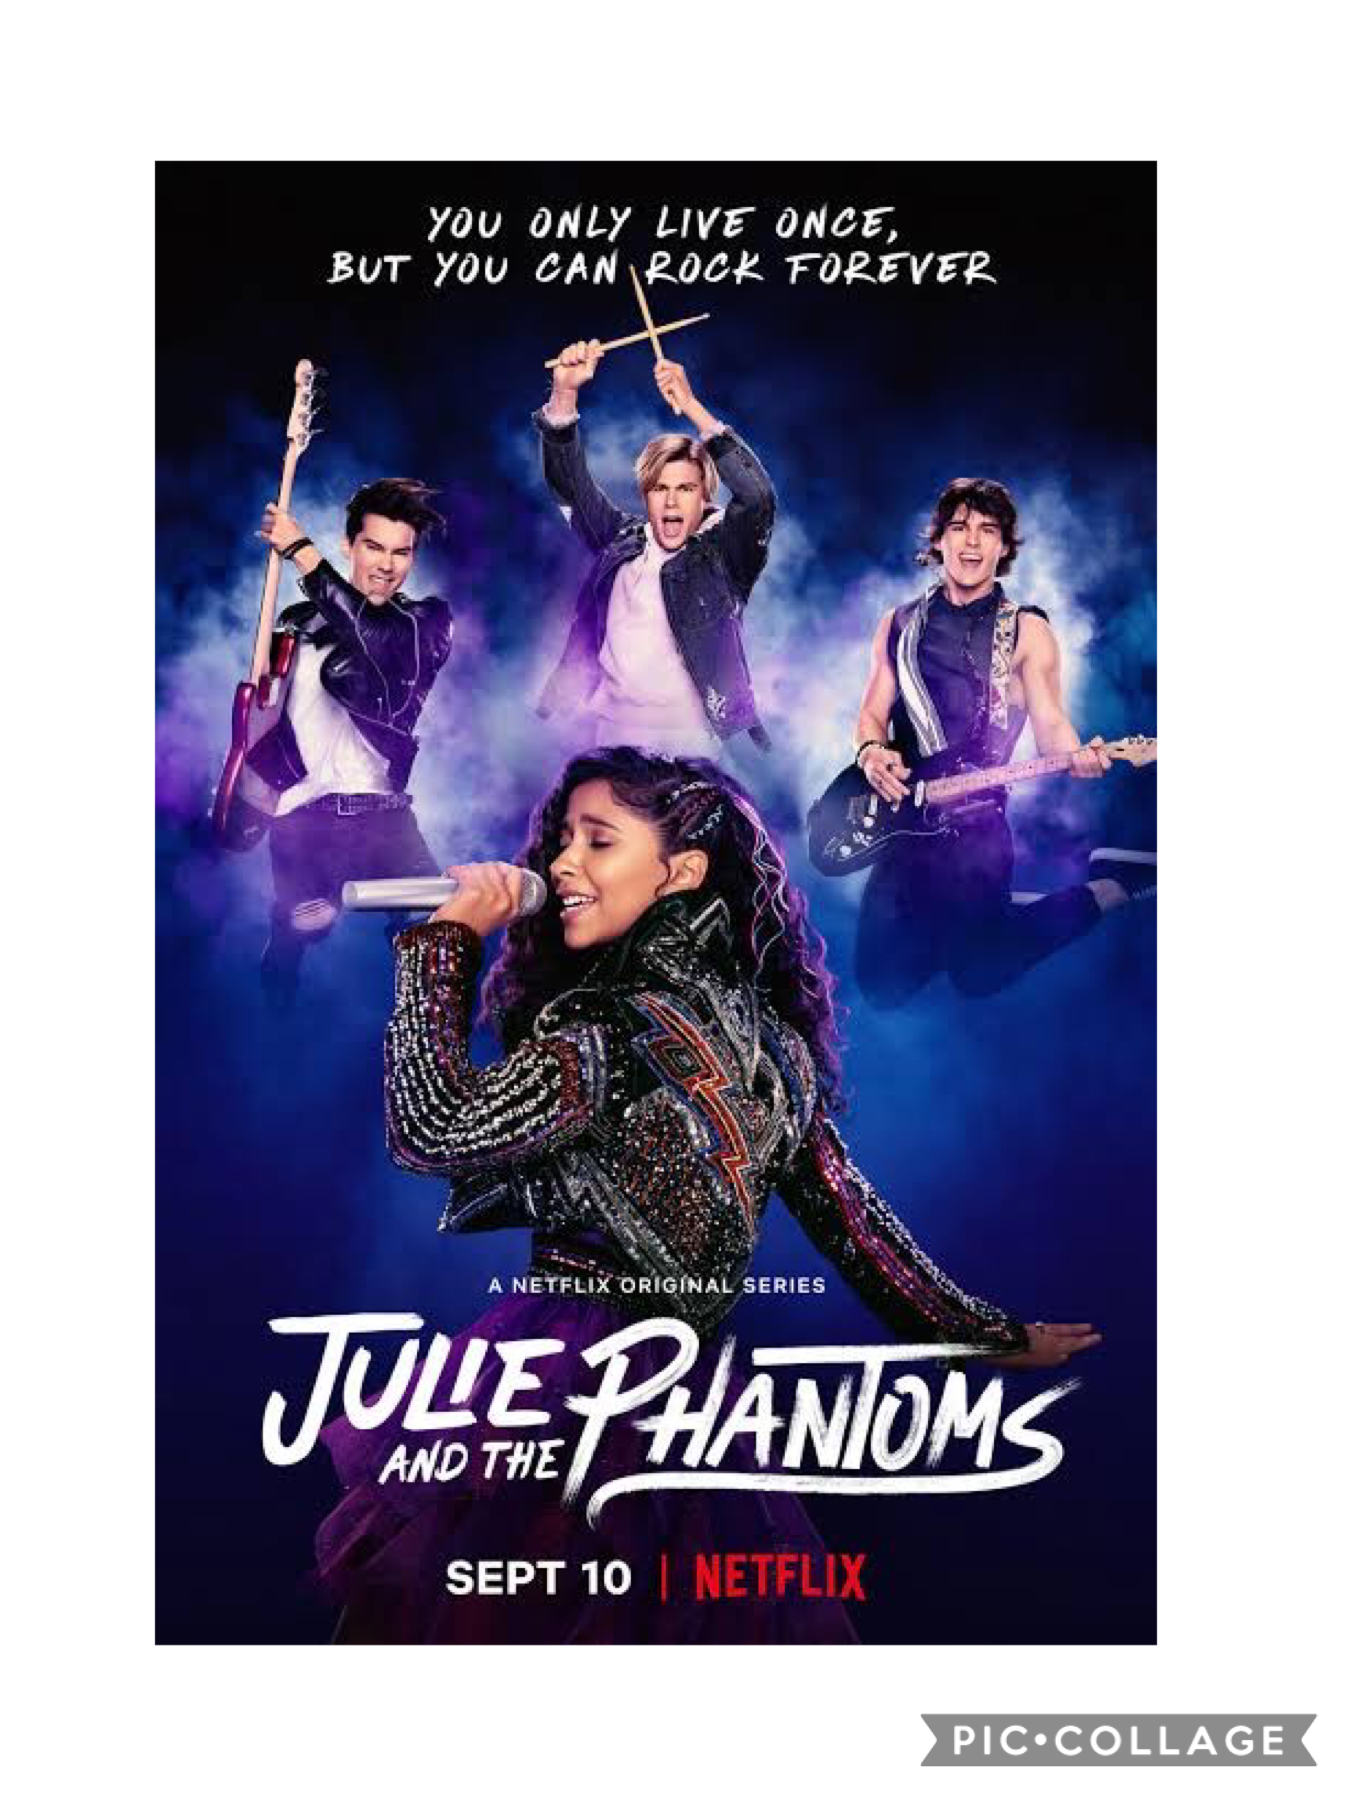 OMG I love Julie and the phantoms it’s my fav show and that will never change also #juke